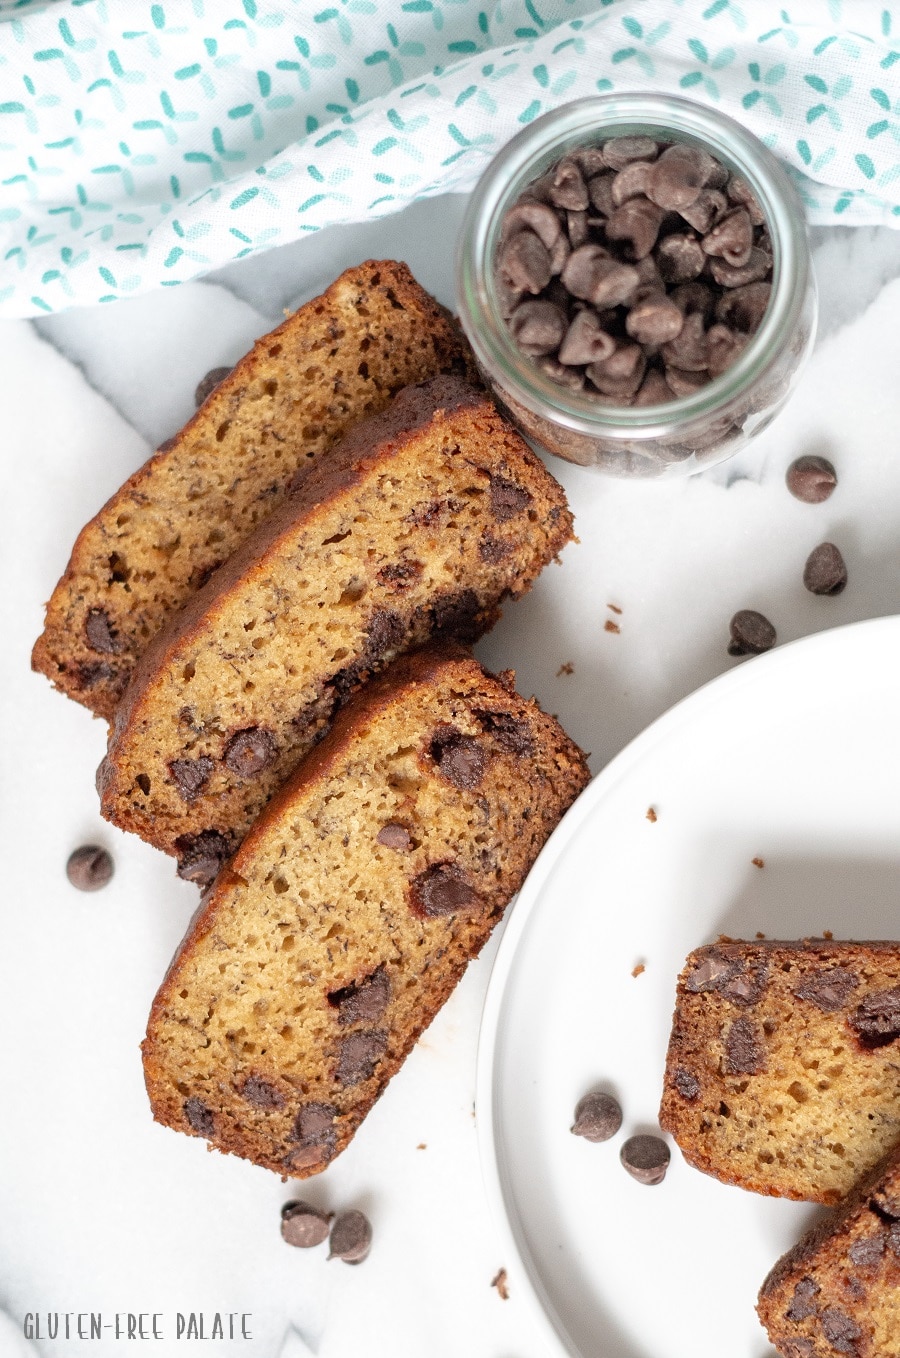 slices of banana bread next to a white plate with slices of banana bread, and a jar of chocolate chips next to a blue and white towel